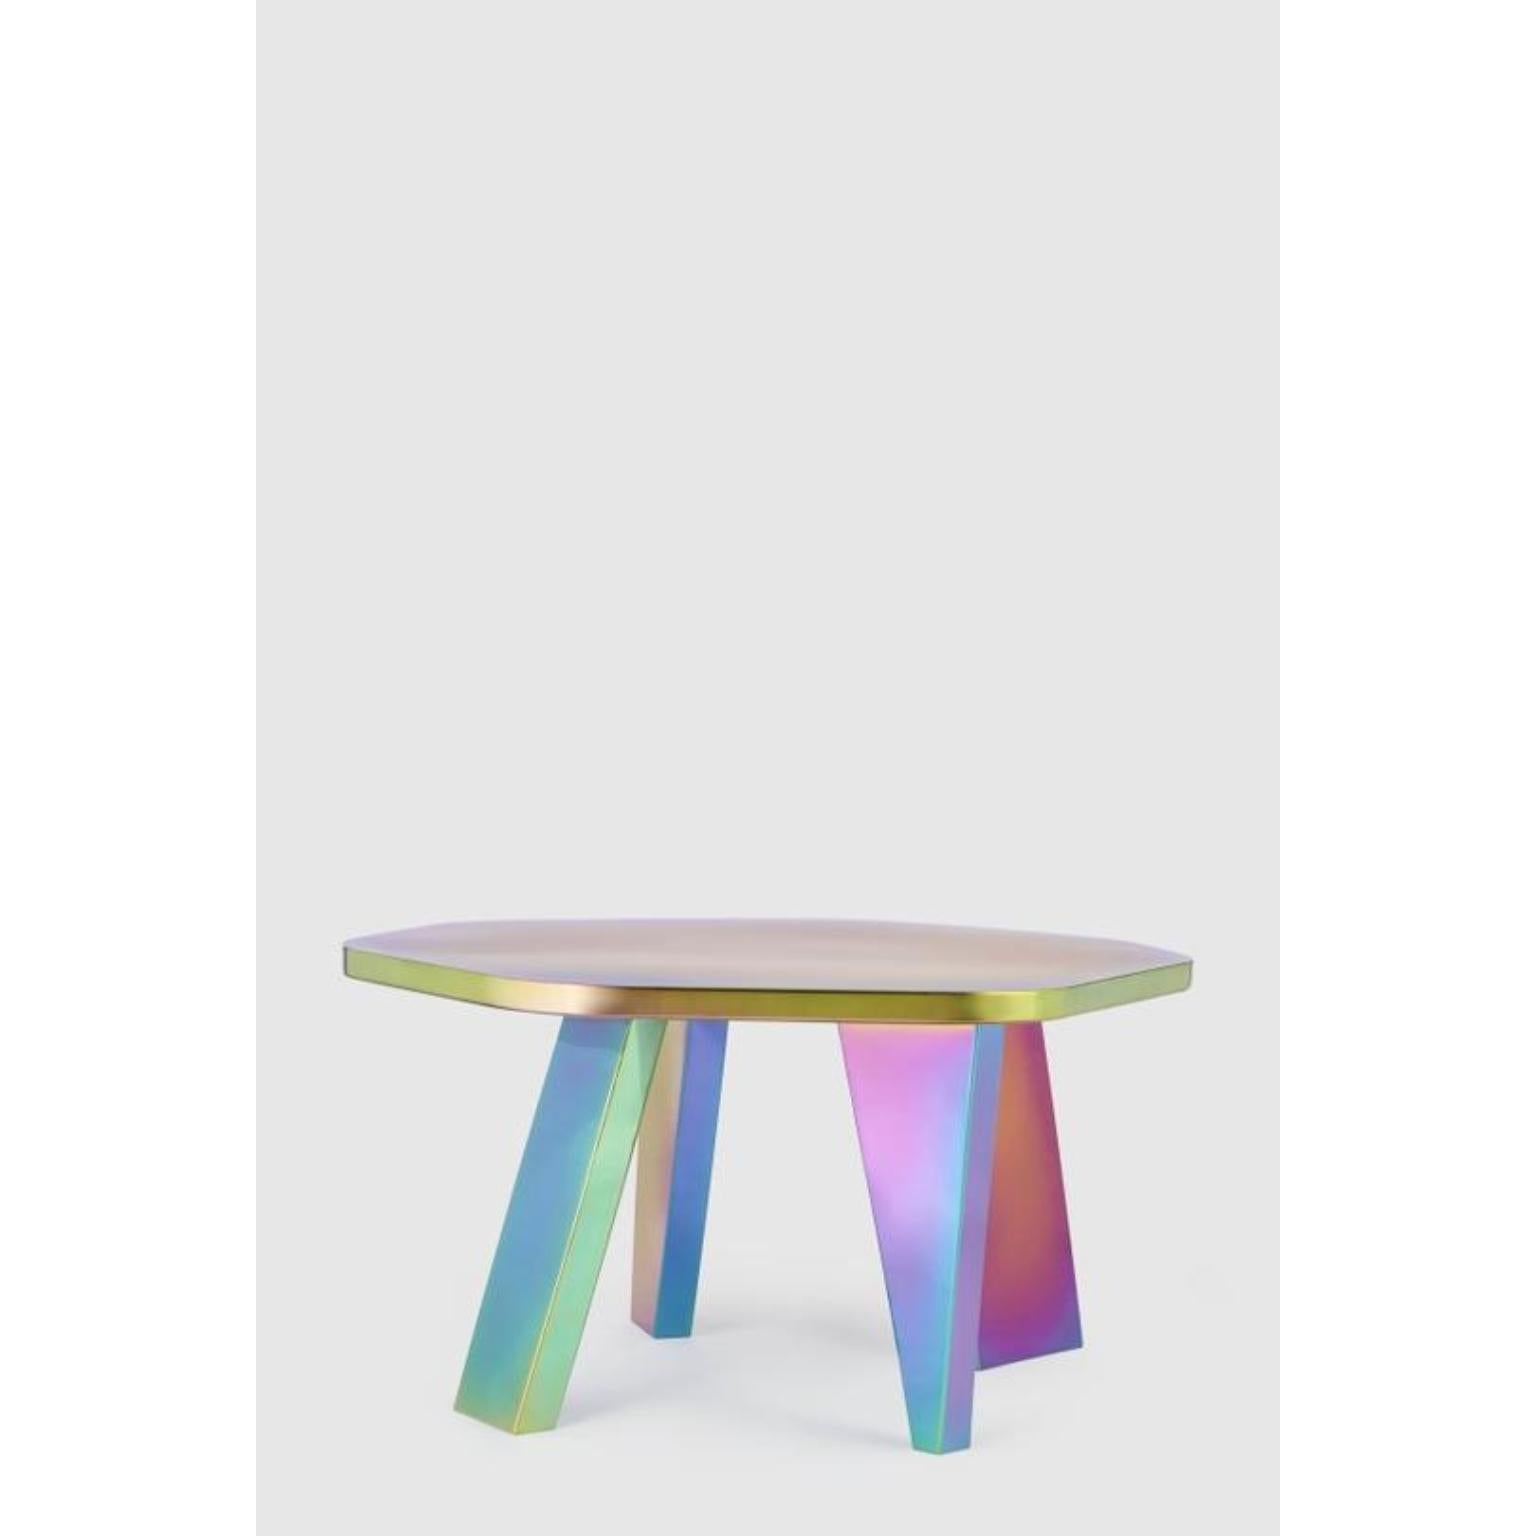 Unique small rainbow center table by Hatsu
Dimensions: D 96 x W 96 x H 50 cm 
Materials: Plated stainless steel 

Hatsu is a design studio based in Mumbai that creates modern lighting that are unique and immediately recognisable. We started with